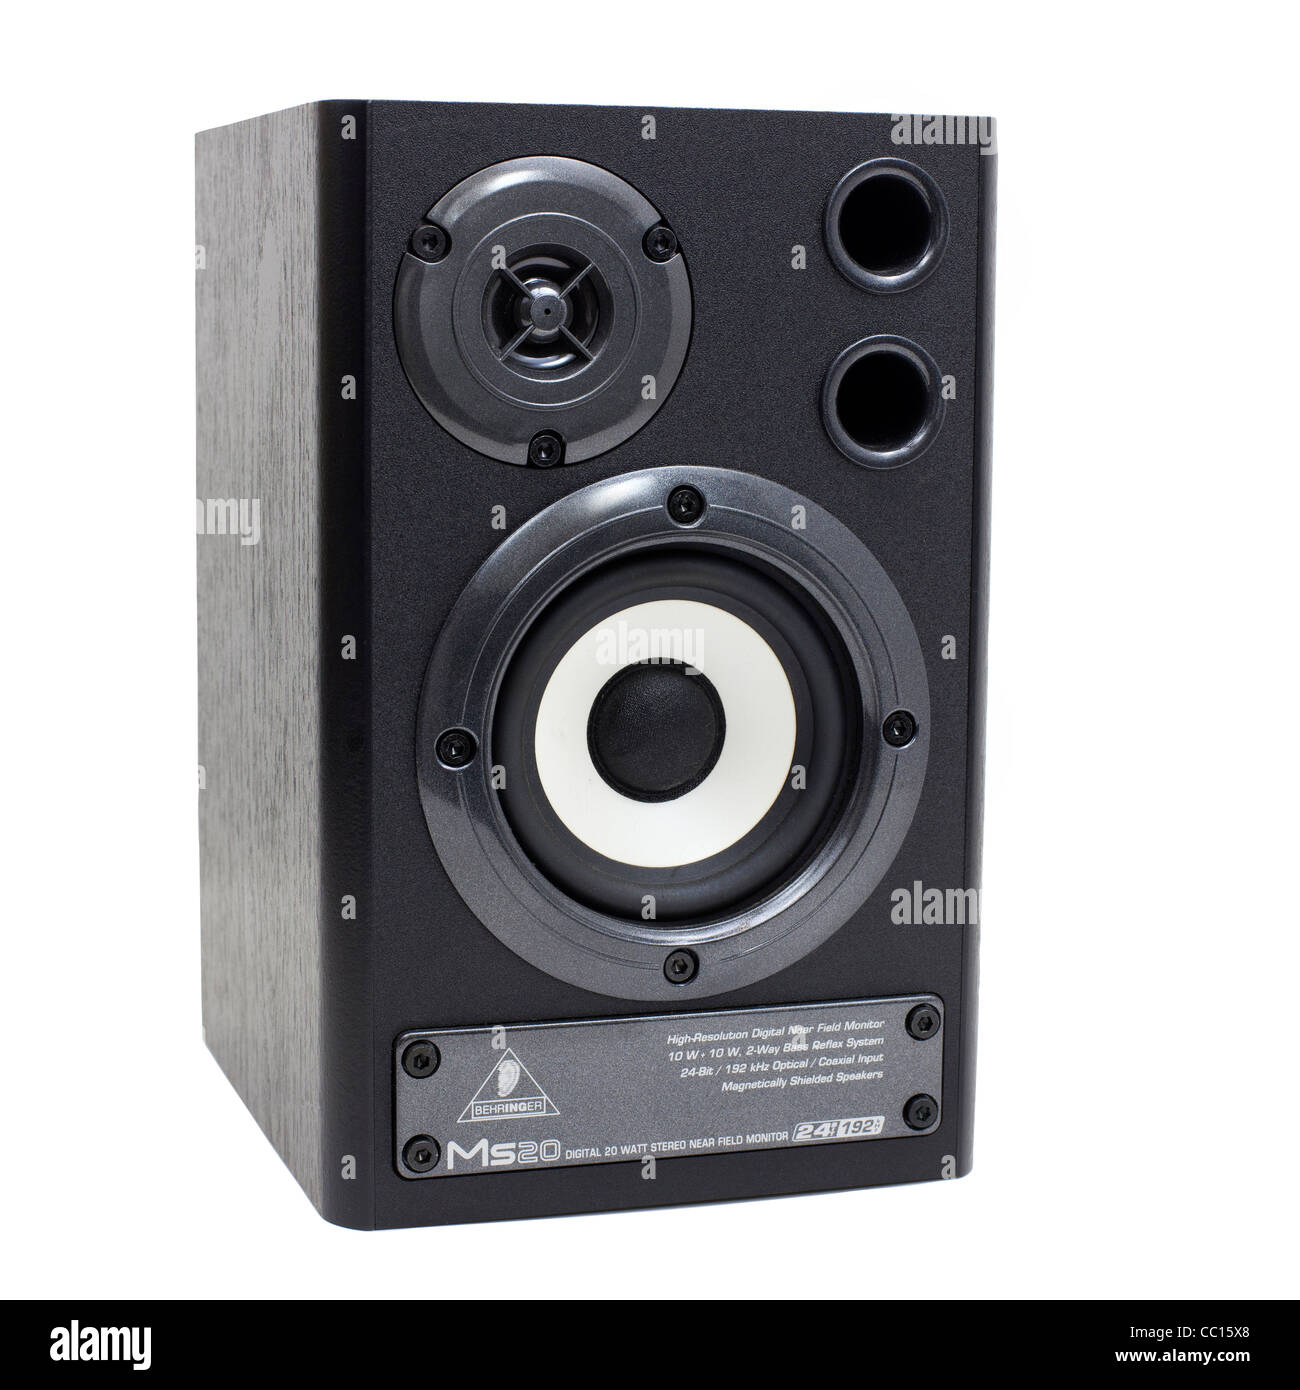 DIGITAL MONITOR SPEAKERS MS2 Product retail shots against pure white background in under studio lighting. Stock Photo